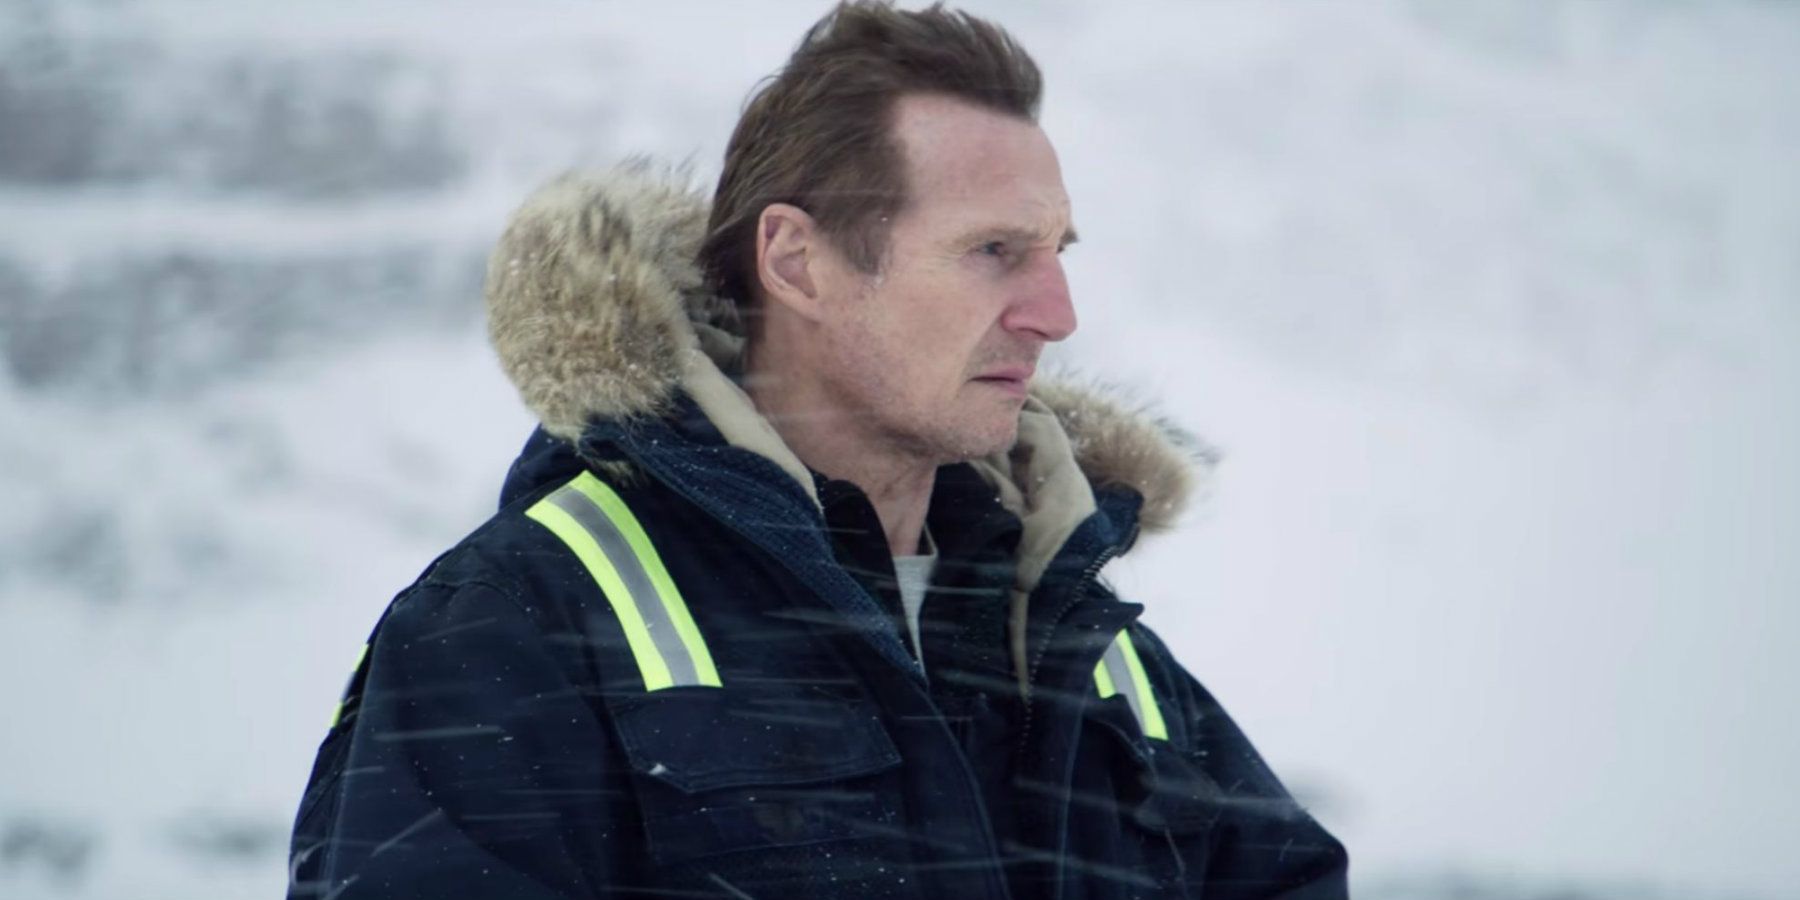 Liam Neeson from Cold Pursuit